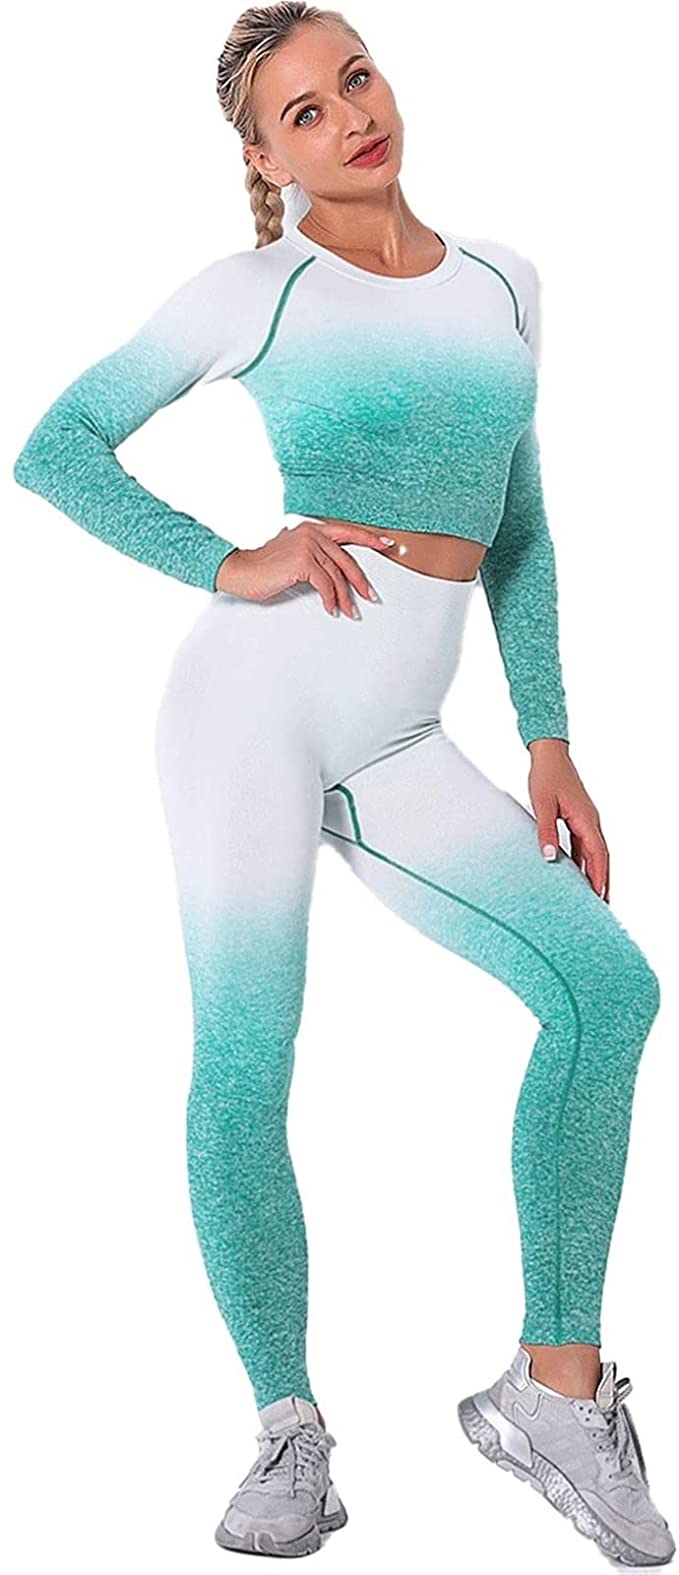 Yoga Outfits Workout Set for Women 2 Pieces Seamless Gym Tracksuit,Yoga Sportswear with Long Sleeve and High Waist Leggings for Pilates, Fitness, Exercise,Running,Cycling,Jogging